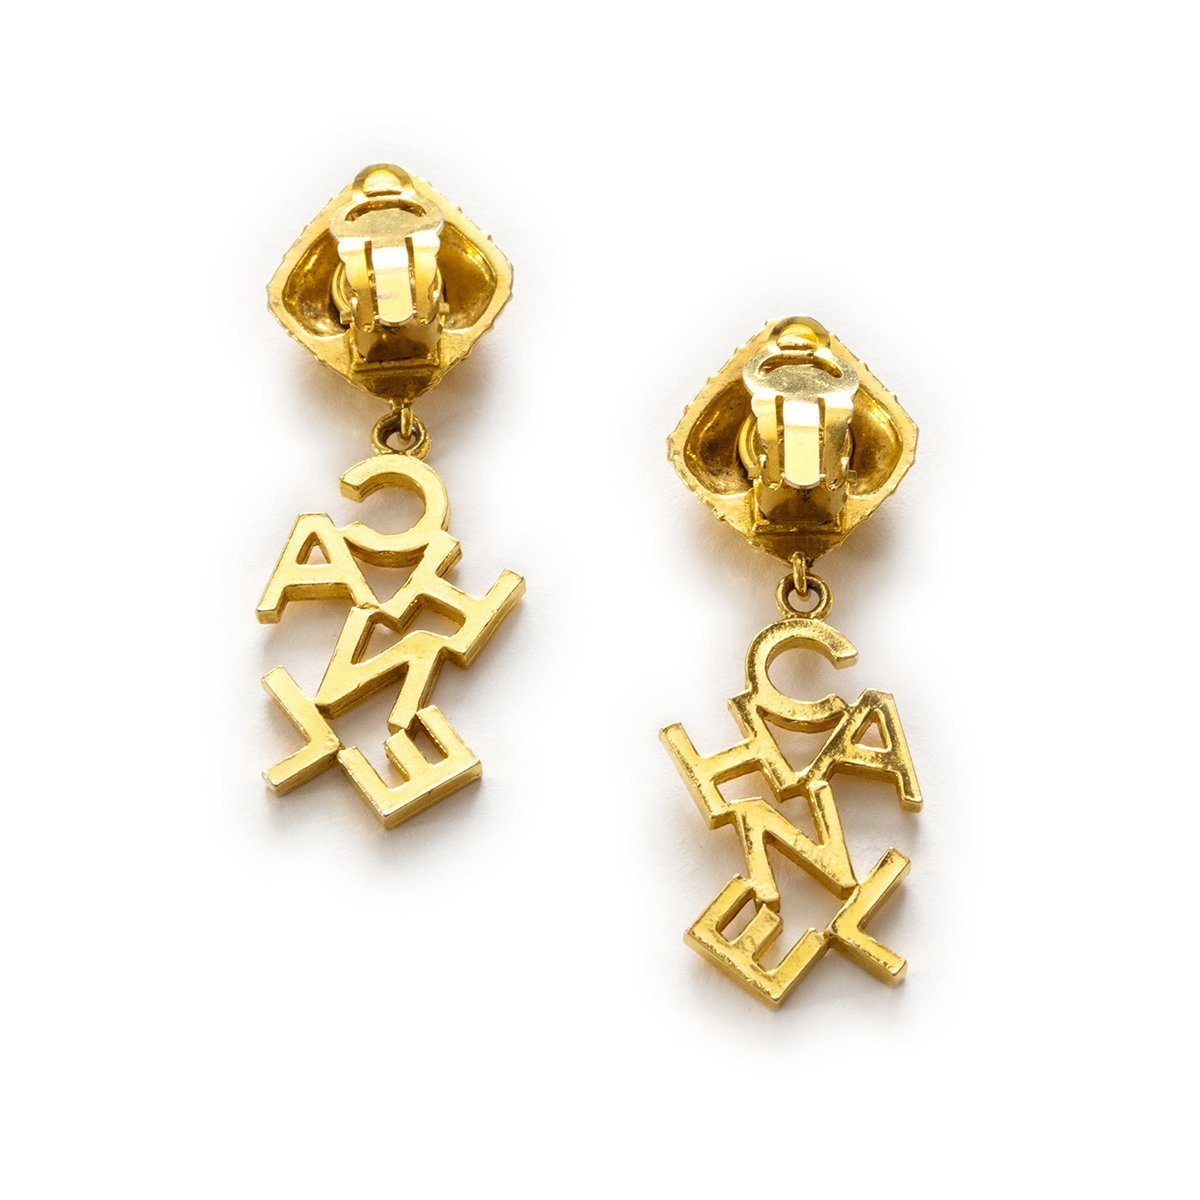 Vintage Chanel Logo Clip Earrings, Gold Plated Metal